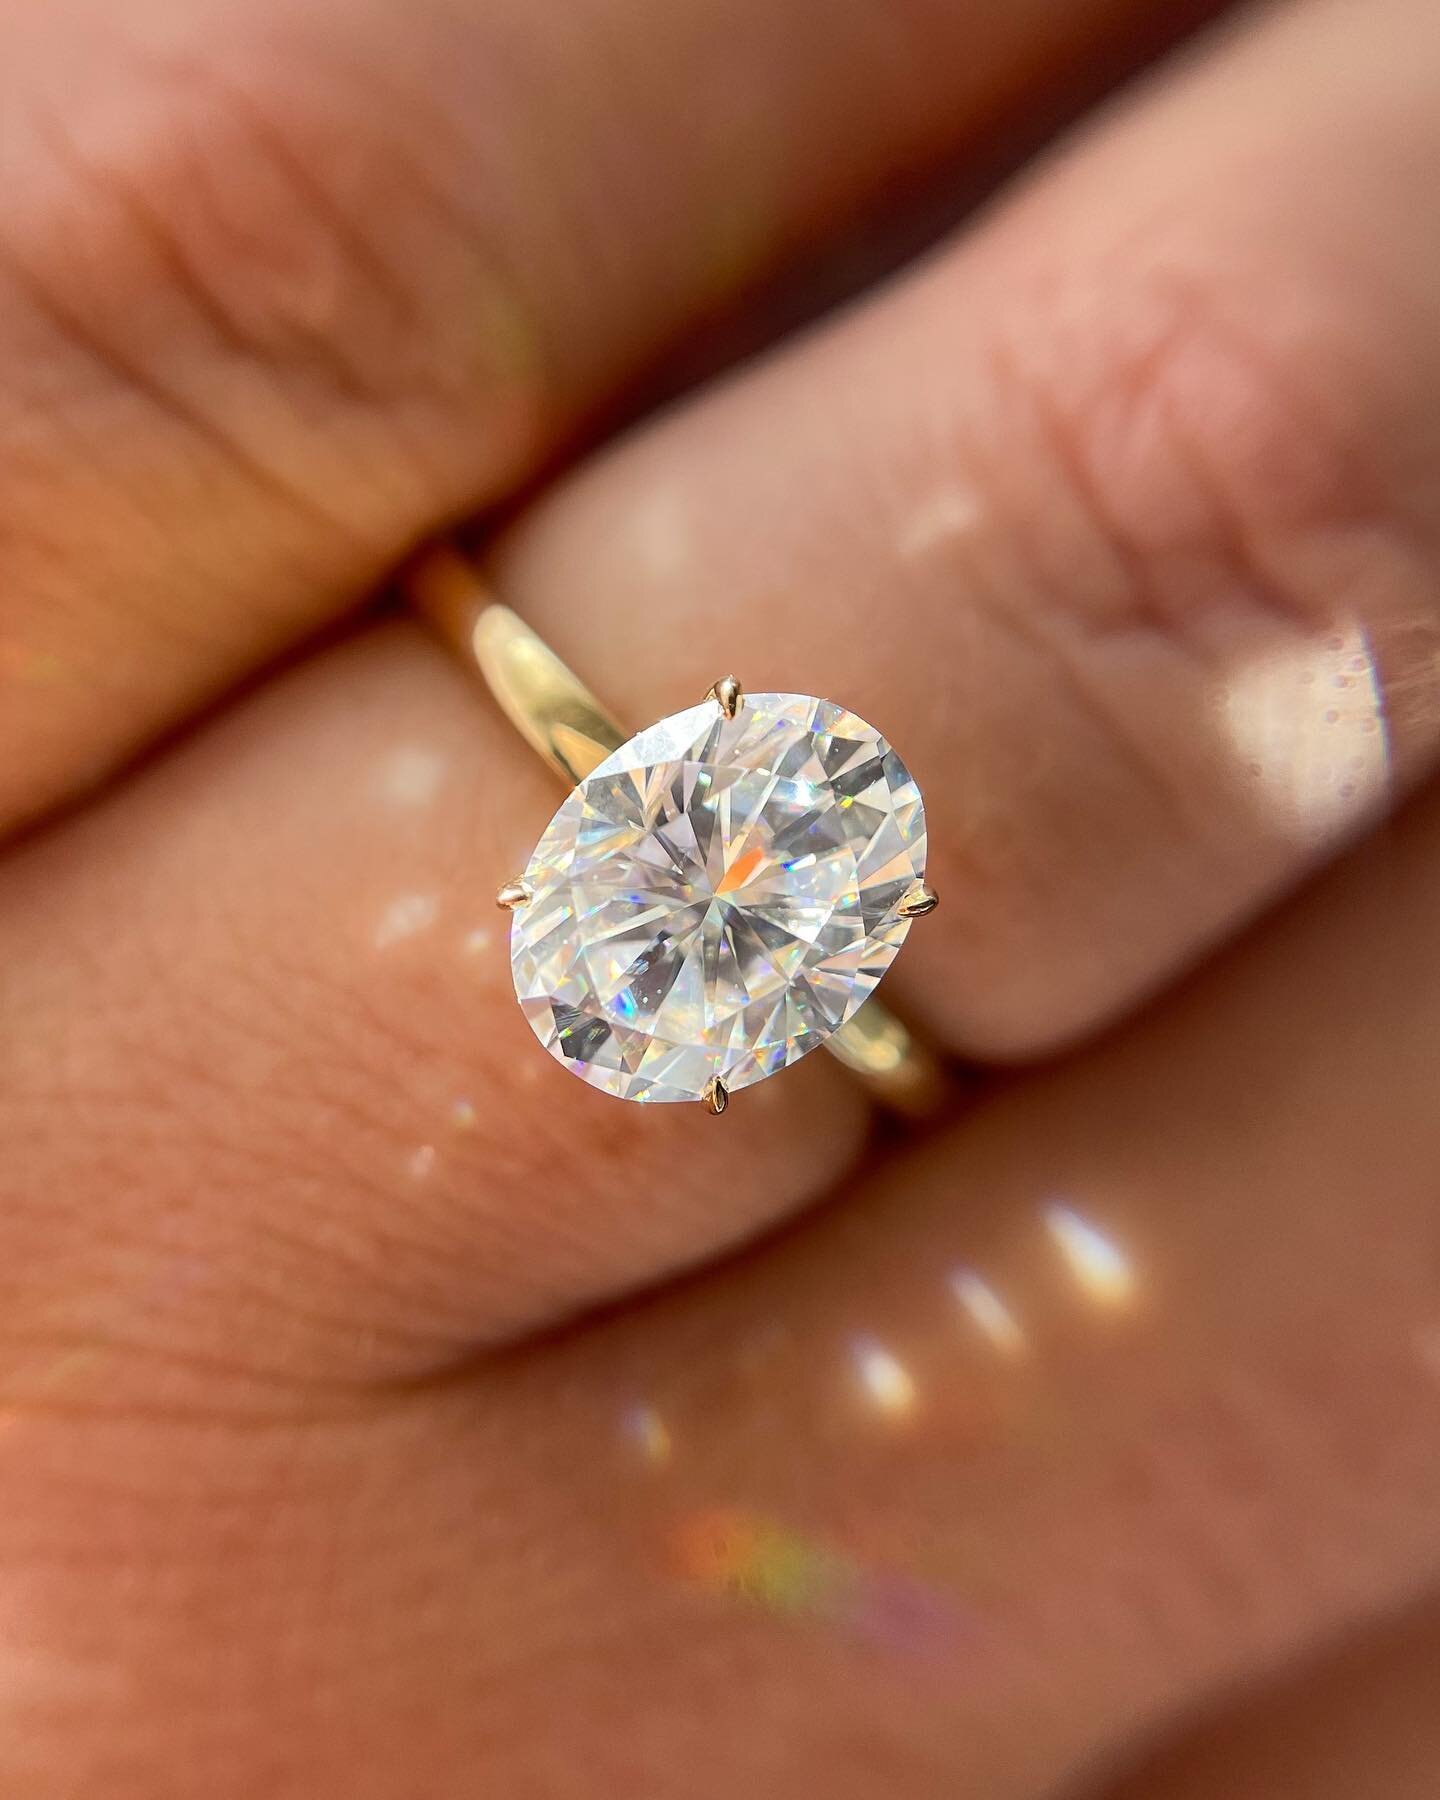 When the sunlight hits 💫 #gracemariejewellery 

&mdash;&mdash;&mdash;&mdash;&mdash;&mdash;&mdash;&mdash;&mdash;&mdash;&mdash;&mdash;&mdash;&mdash;&mdash;&mdash;&mdash;&mdash;

- 9x7mm (2ct) Oval Moissanite 
- Colourless (D)
- VVS1
- 18K Yellow Gold
